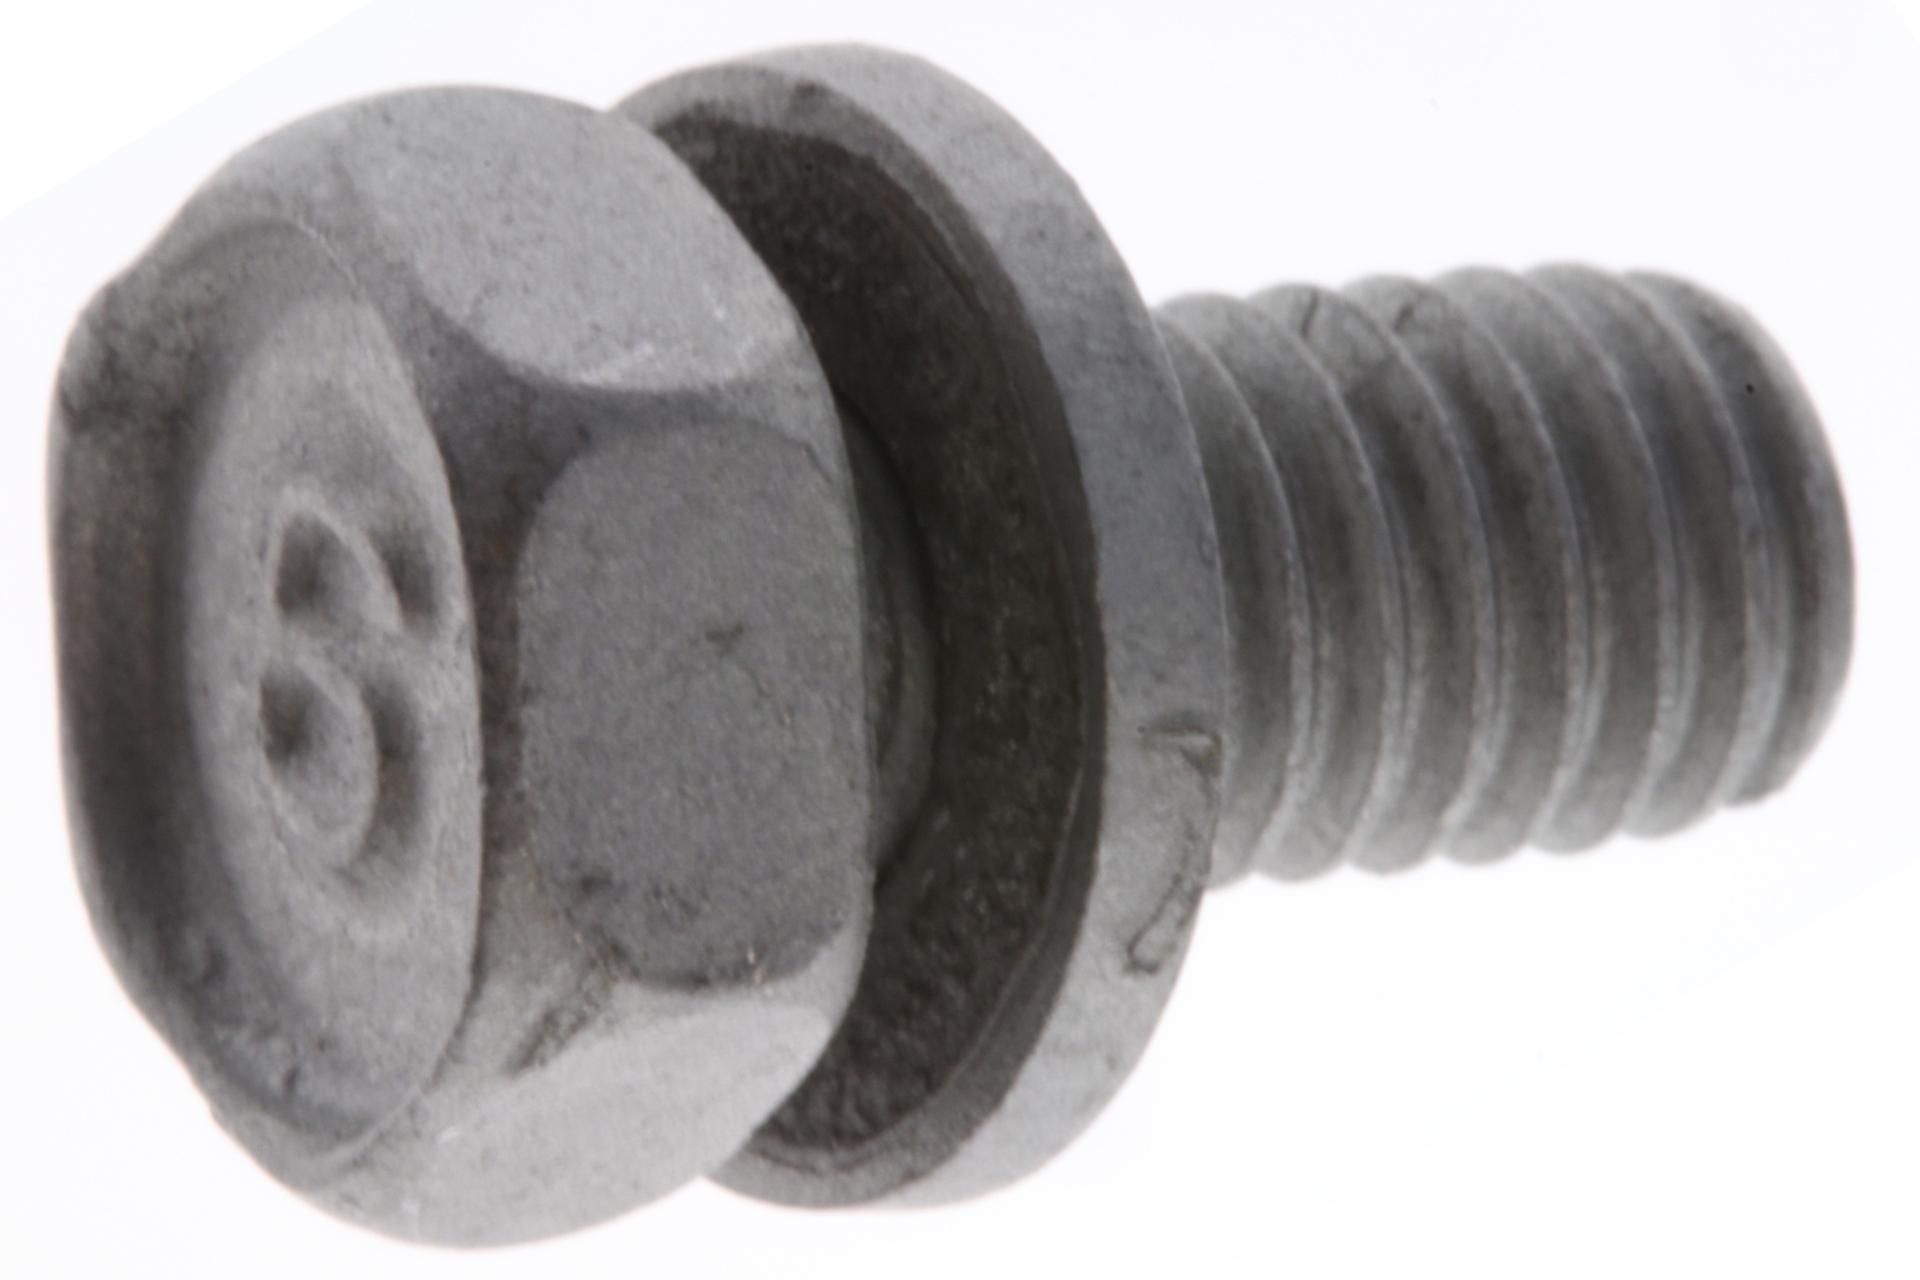 90119-068C9-00 BOLT, WITH WASHER